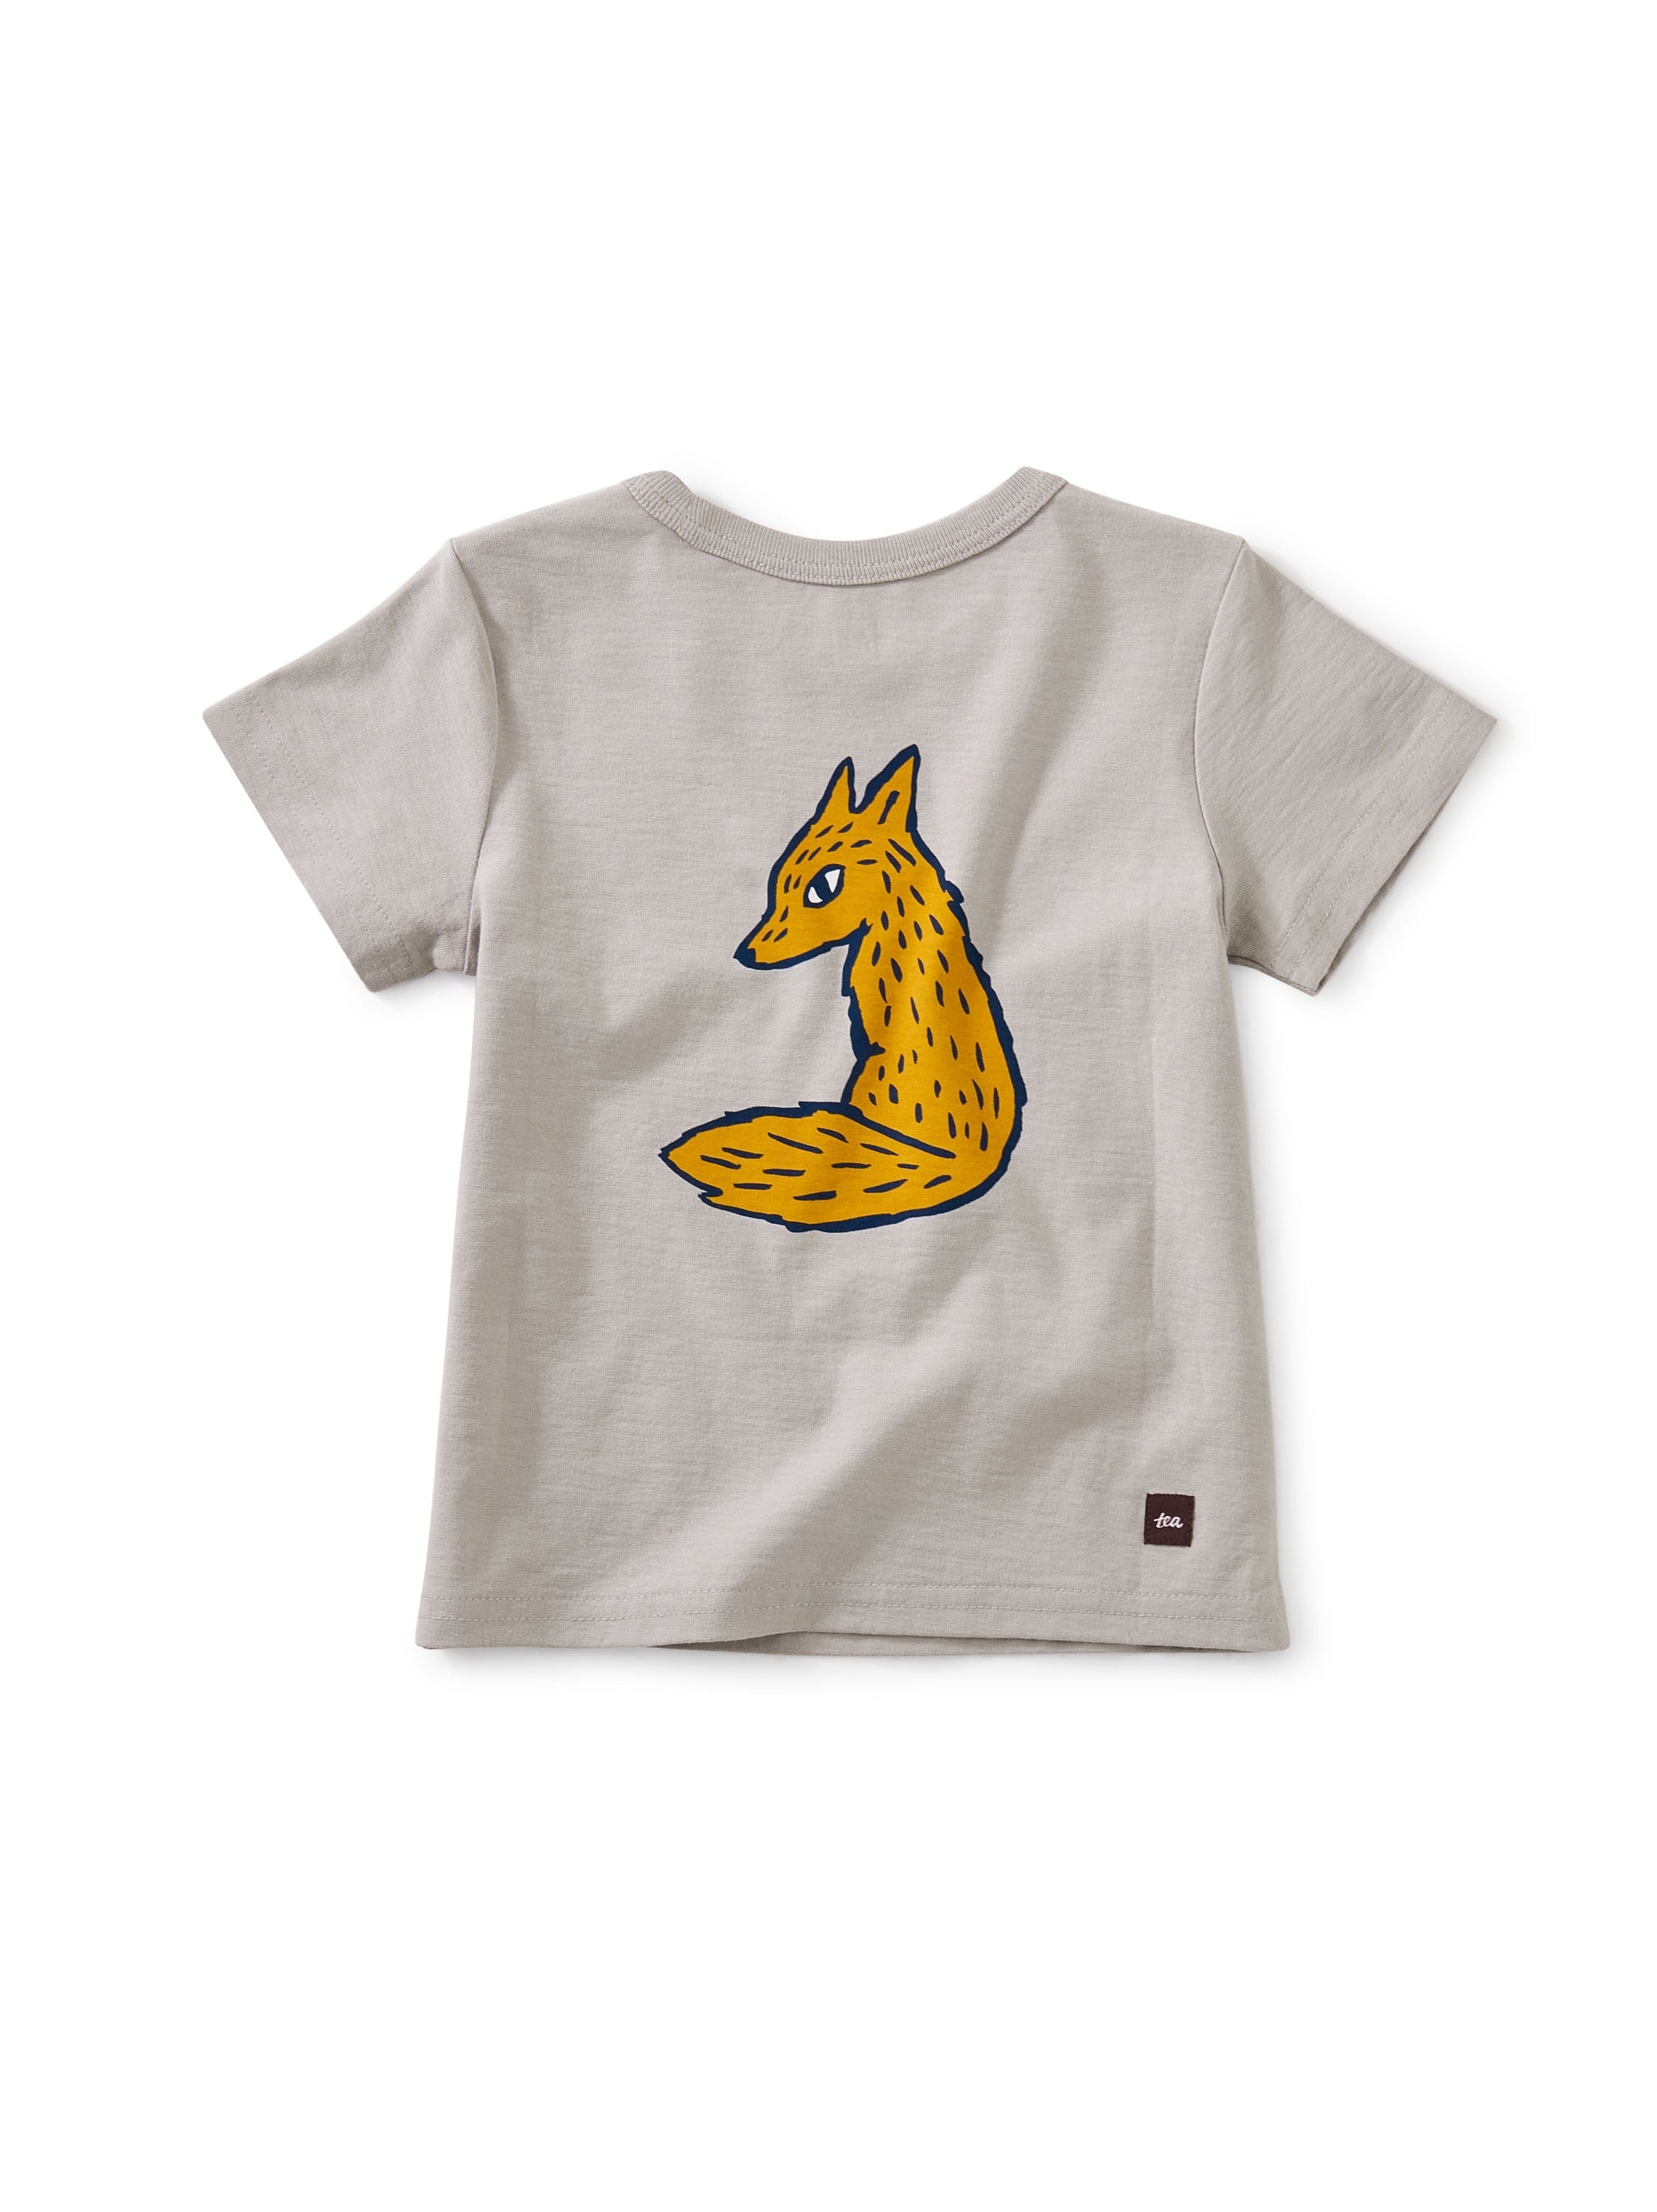 SLY FOX GRAPHIC TEE